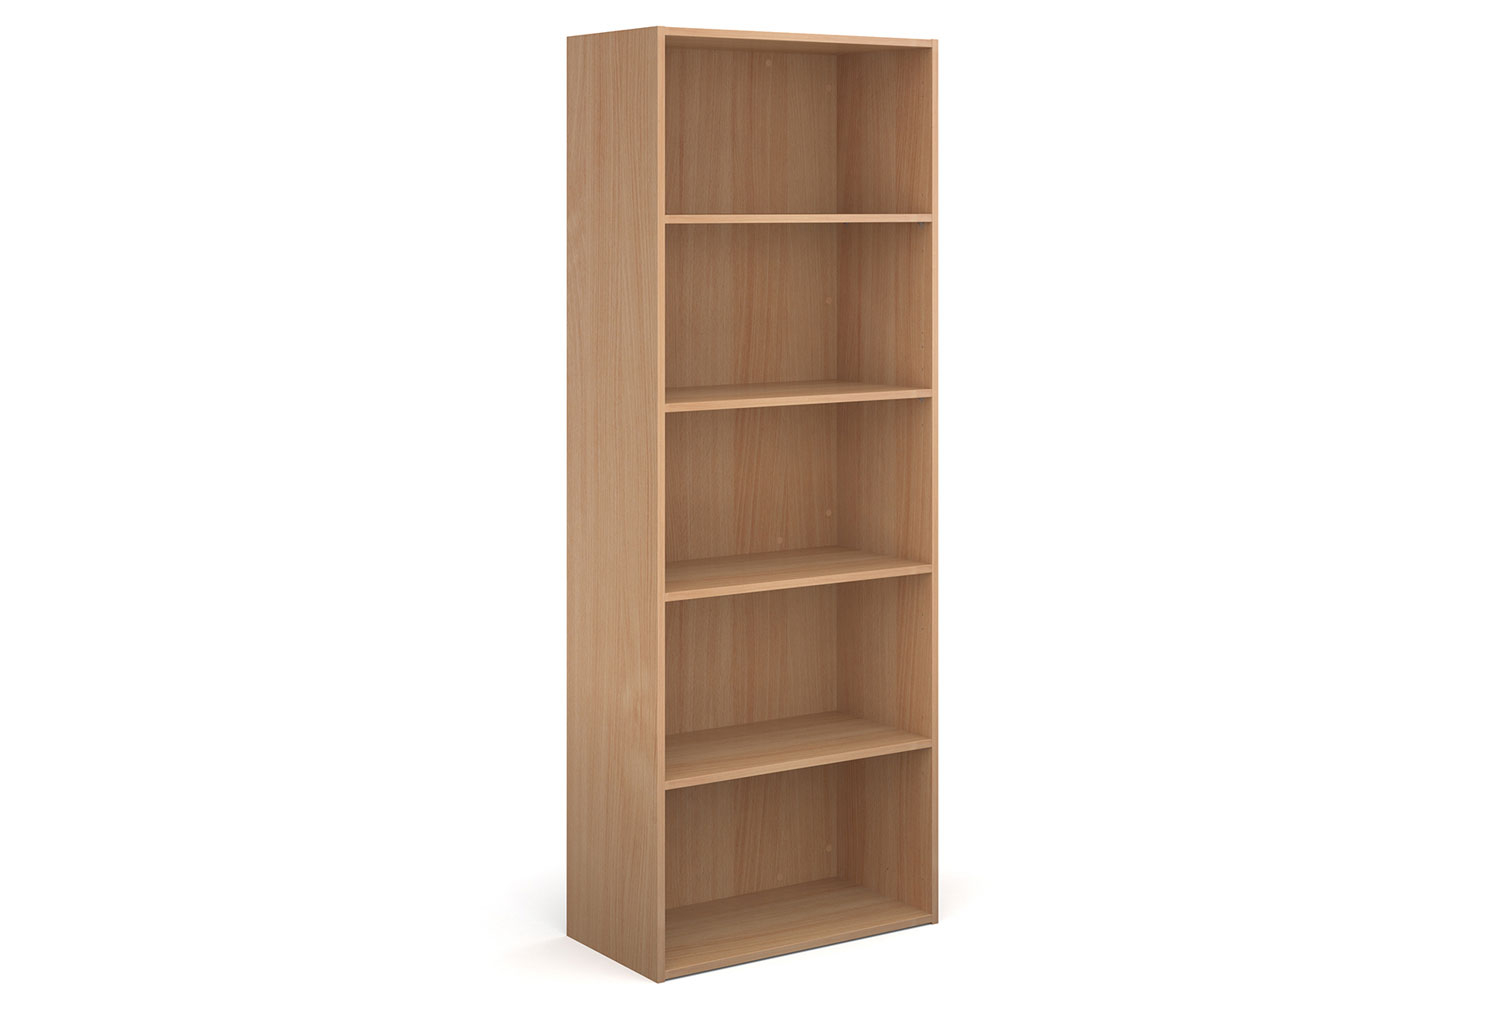 Value Line Classic+ Office Bookcases, 4 Shelf - 76wx39dx203h (cm), Beech, Express Delivery